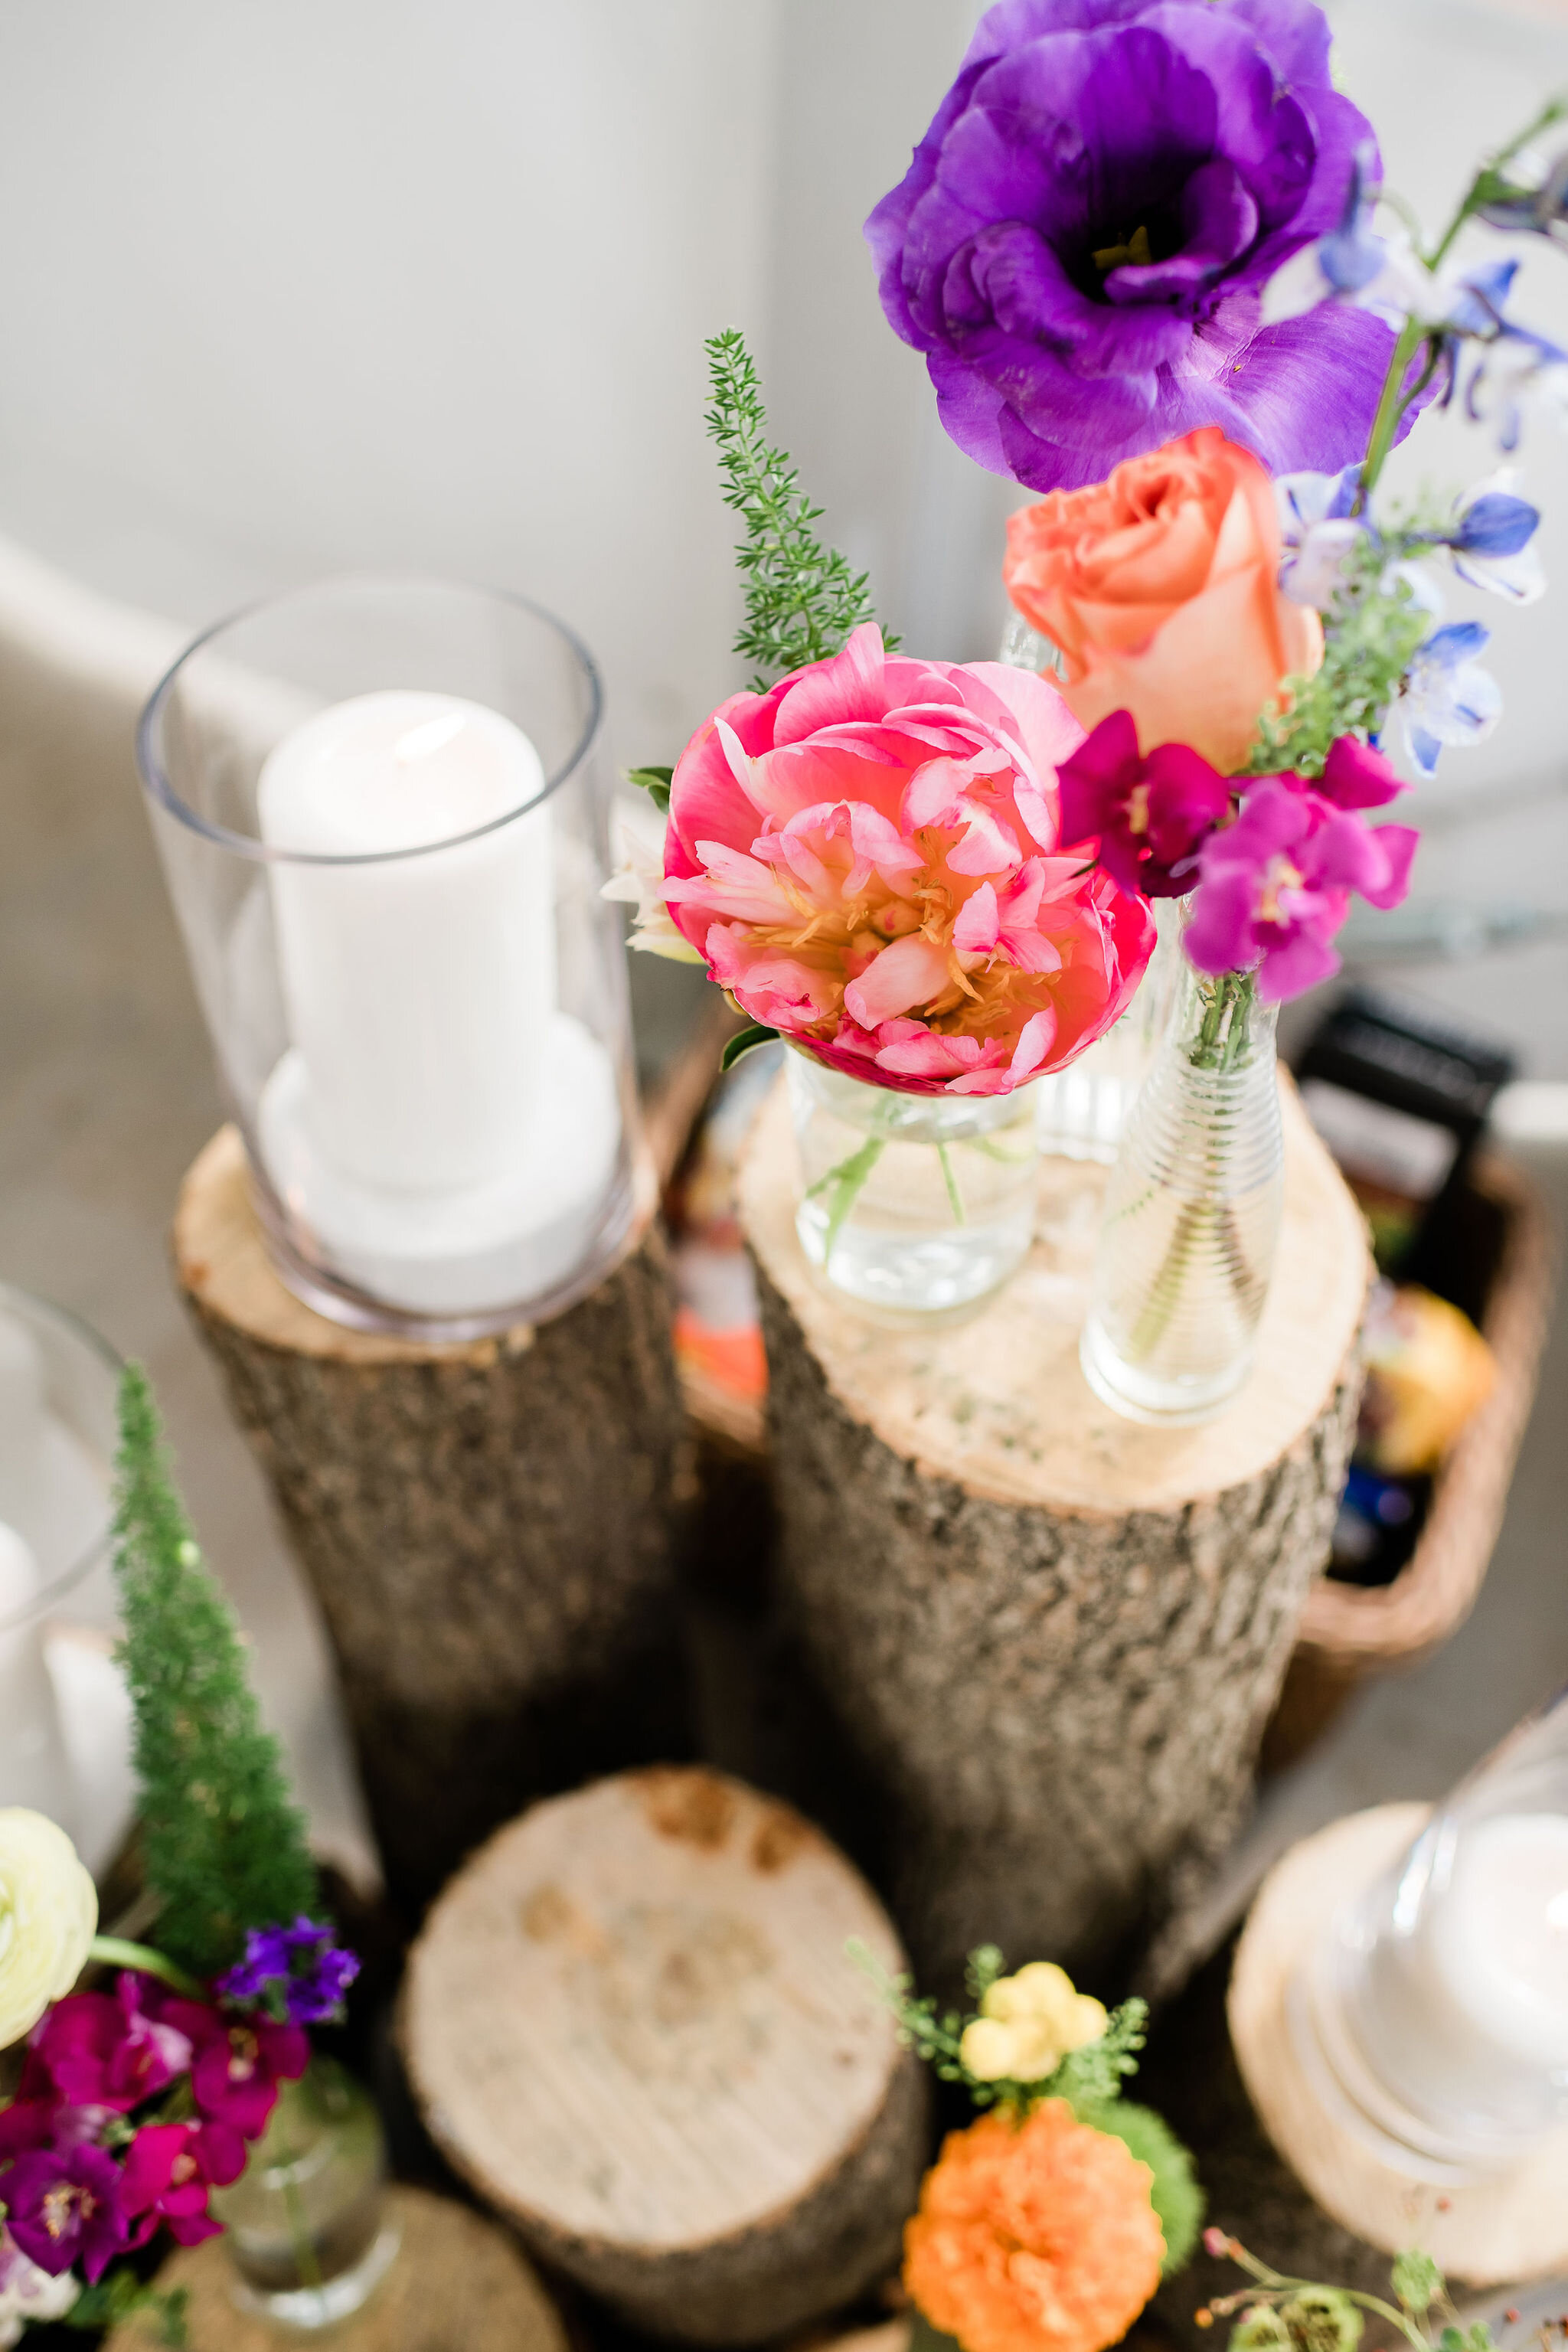 Wooden and floral arrangement with candles